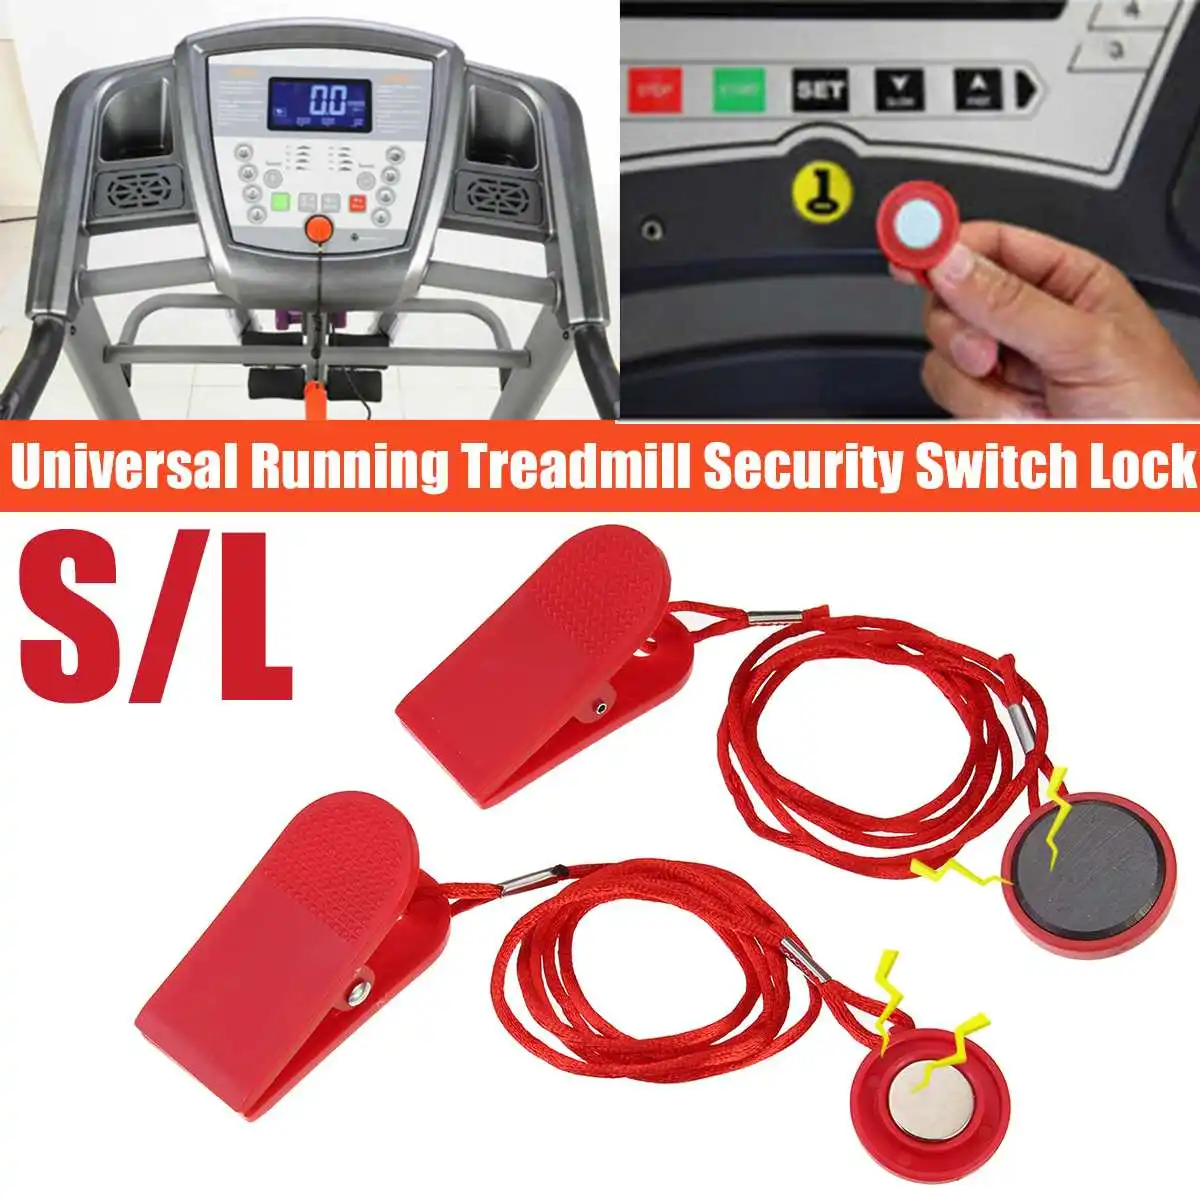 Running Machine Safety Key Treadmill Magnetic Security Switch Lock Fitness UK 